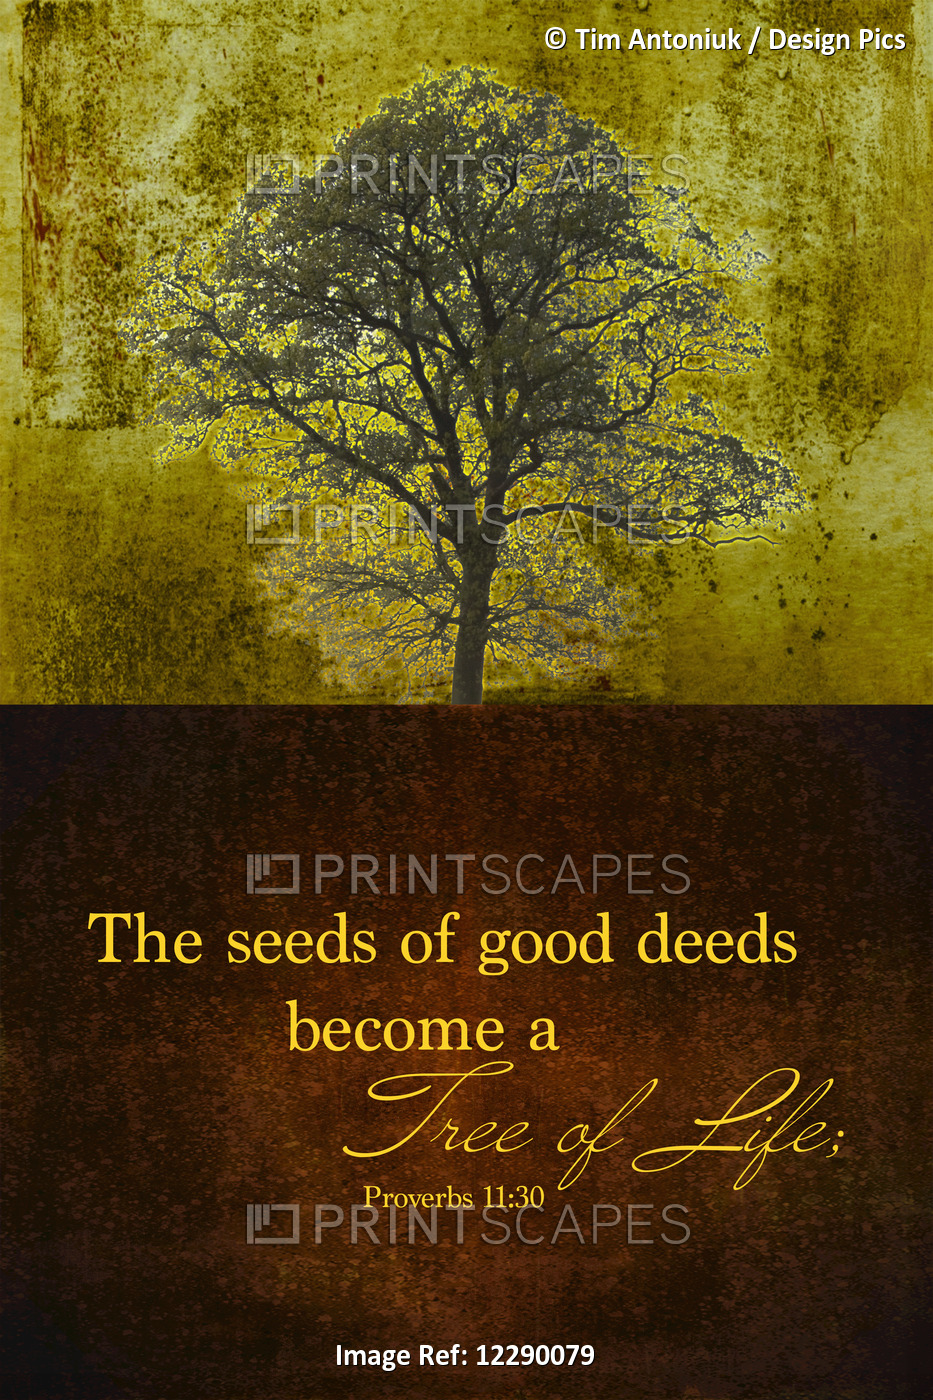 Image Of A Tree Against A Yellow Sky And A Scripture From Proverbs 11:30